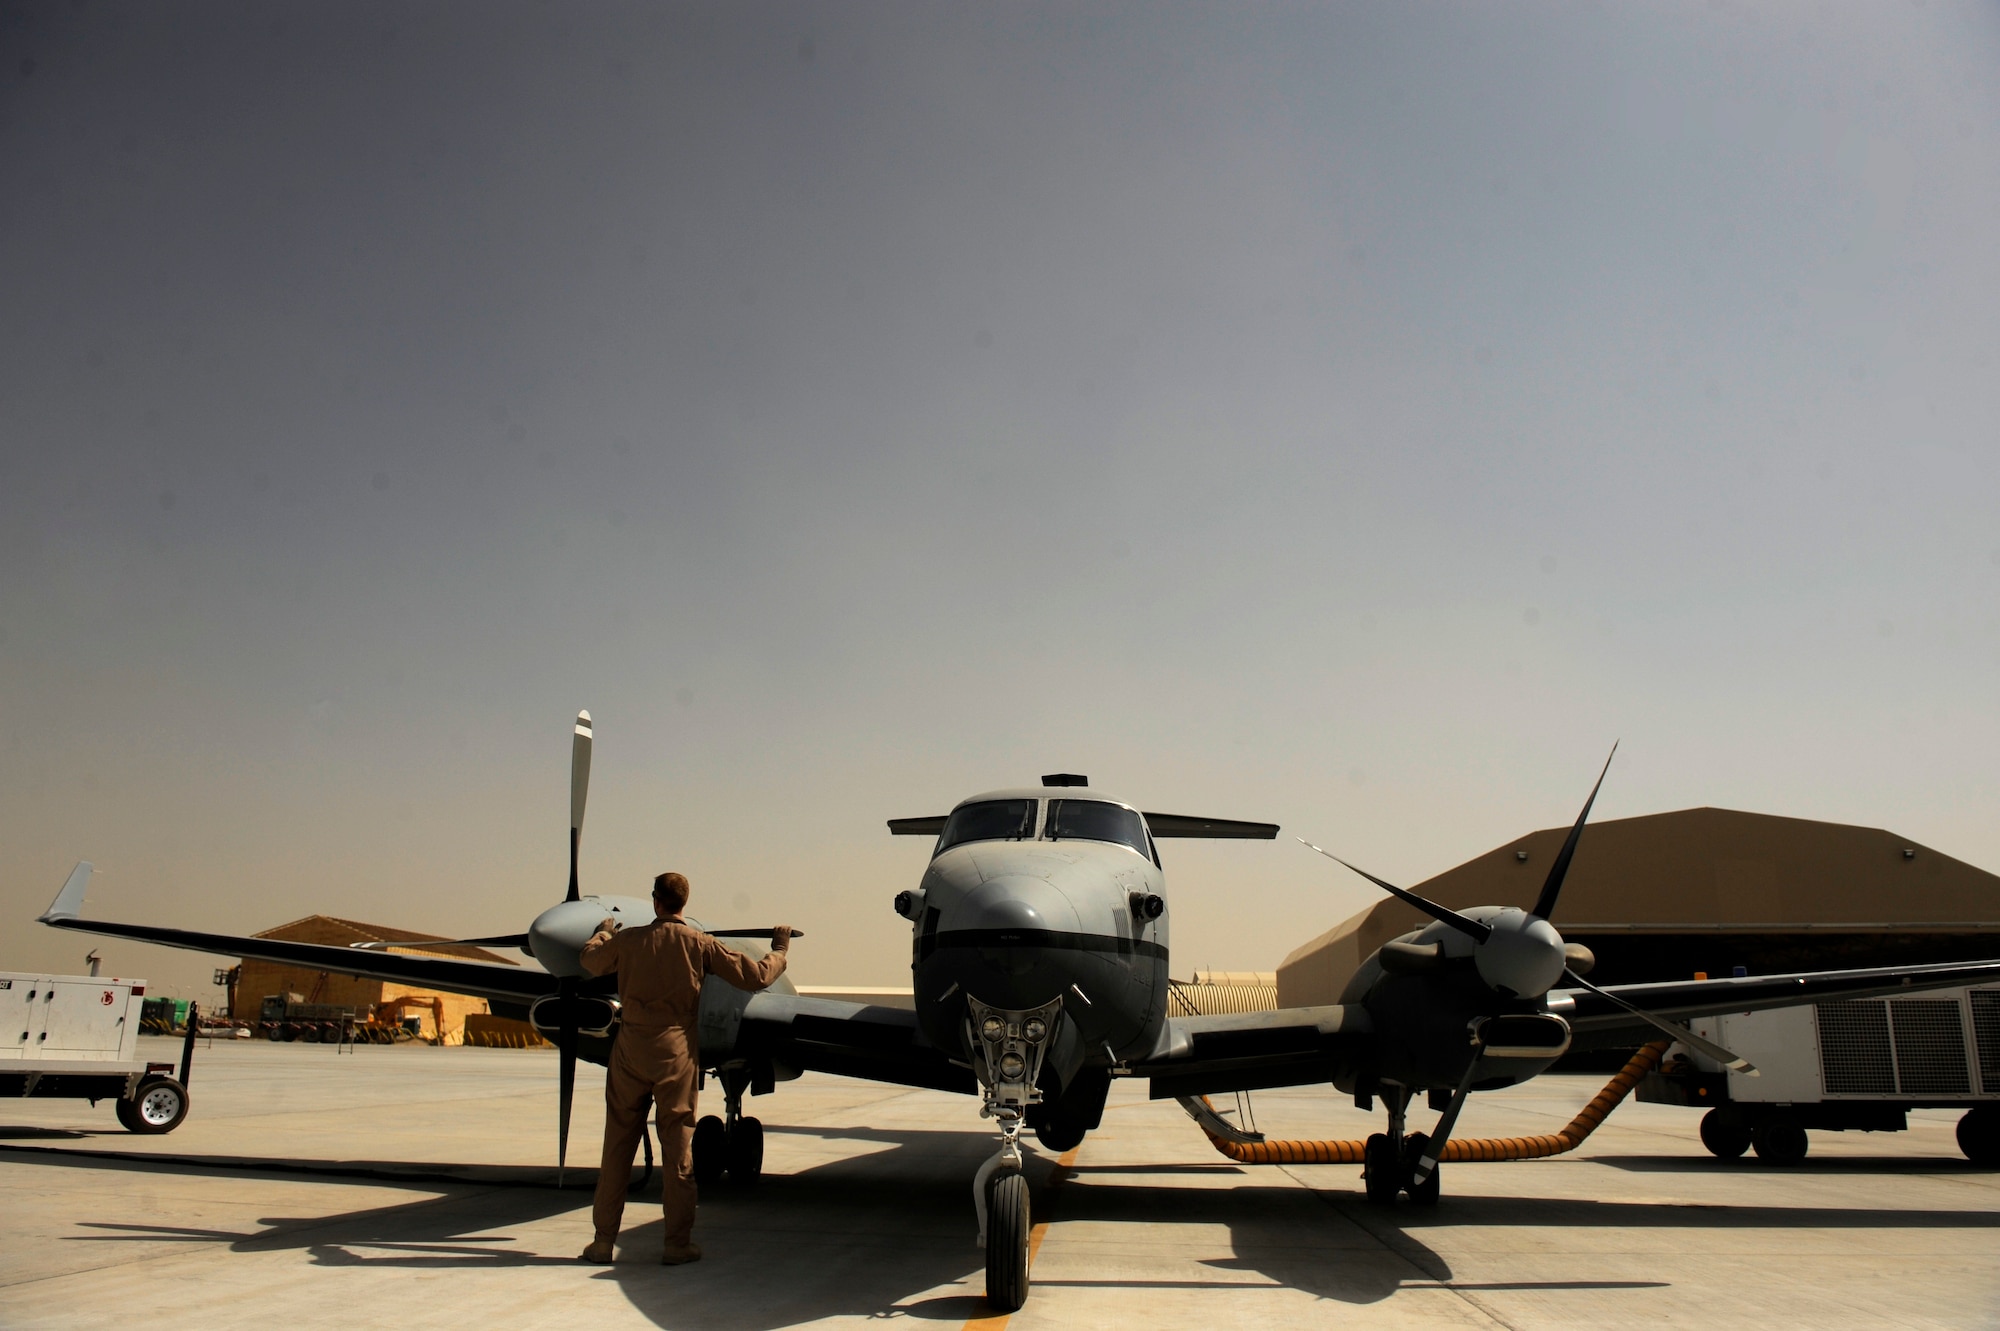 Airmen from the 361st Expeditionary Reconnaissance Squadron prepare an MC-12W Liberty for operations Aug. 25, 2010, on Kandahar Airfield, Afghan.  The MC-12W provides full-motion video and signals intelligence to assist battlefield commanders. (U.S. Air Force photo/Staff Sgt. Eric Harris) 